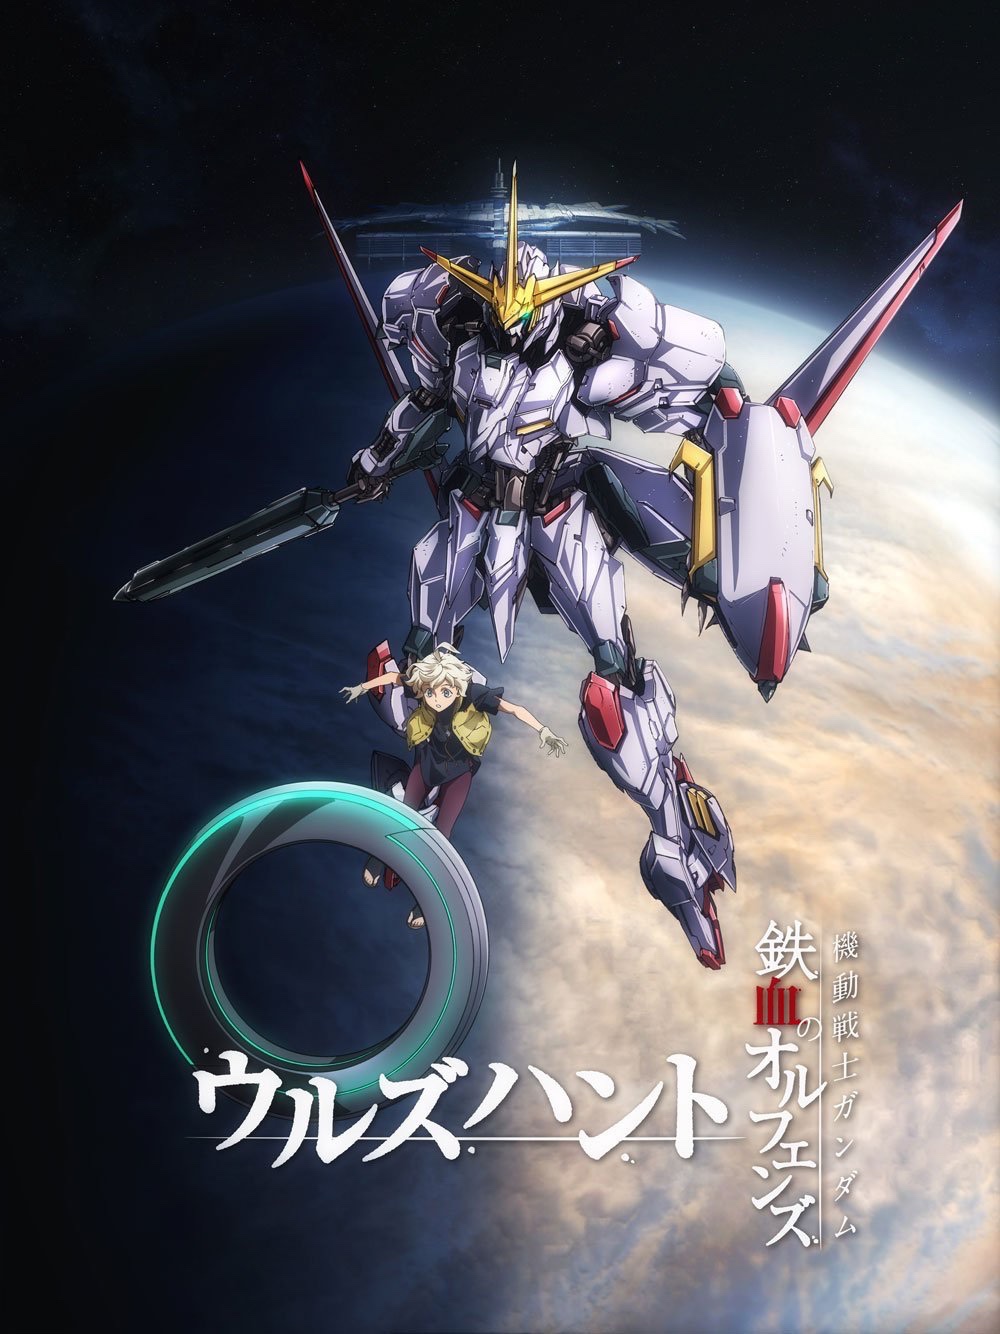 Gundam Iron Blooded Orphans Urdr Hunt Anime Launches Official Webpage Gundam News